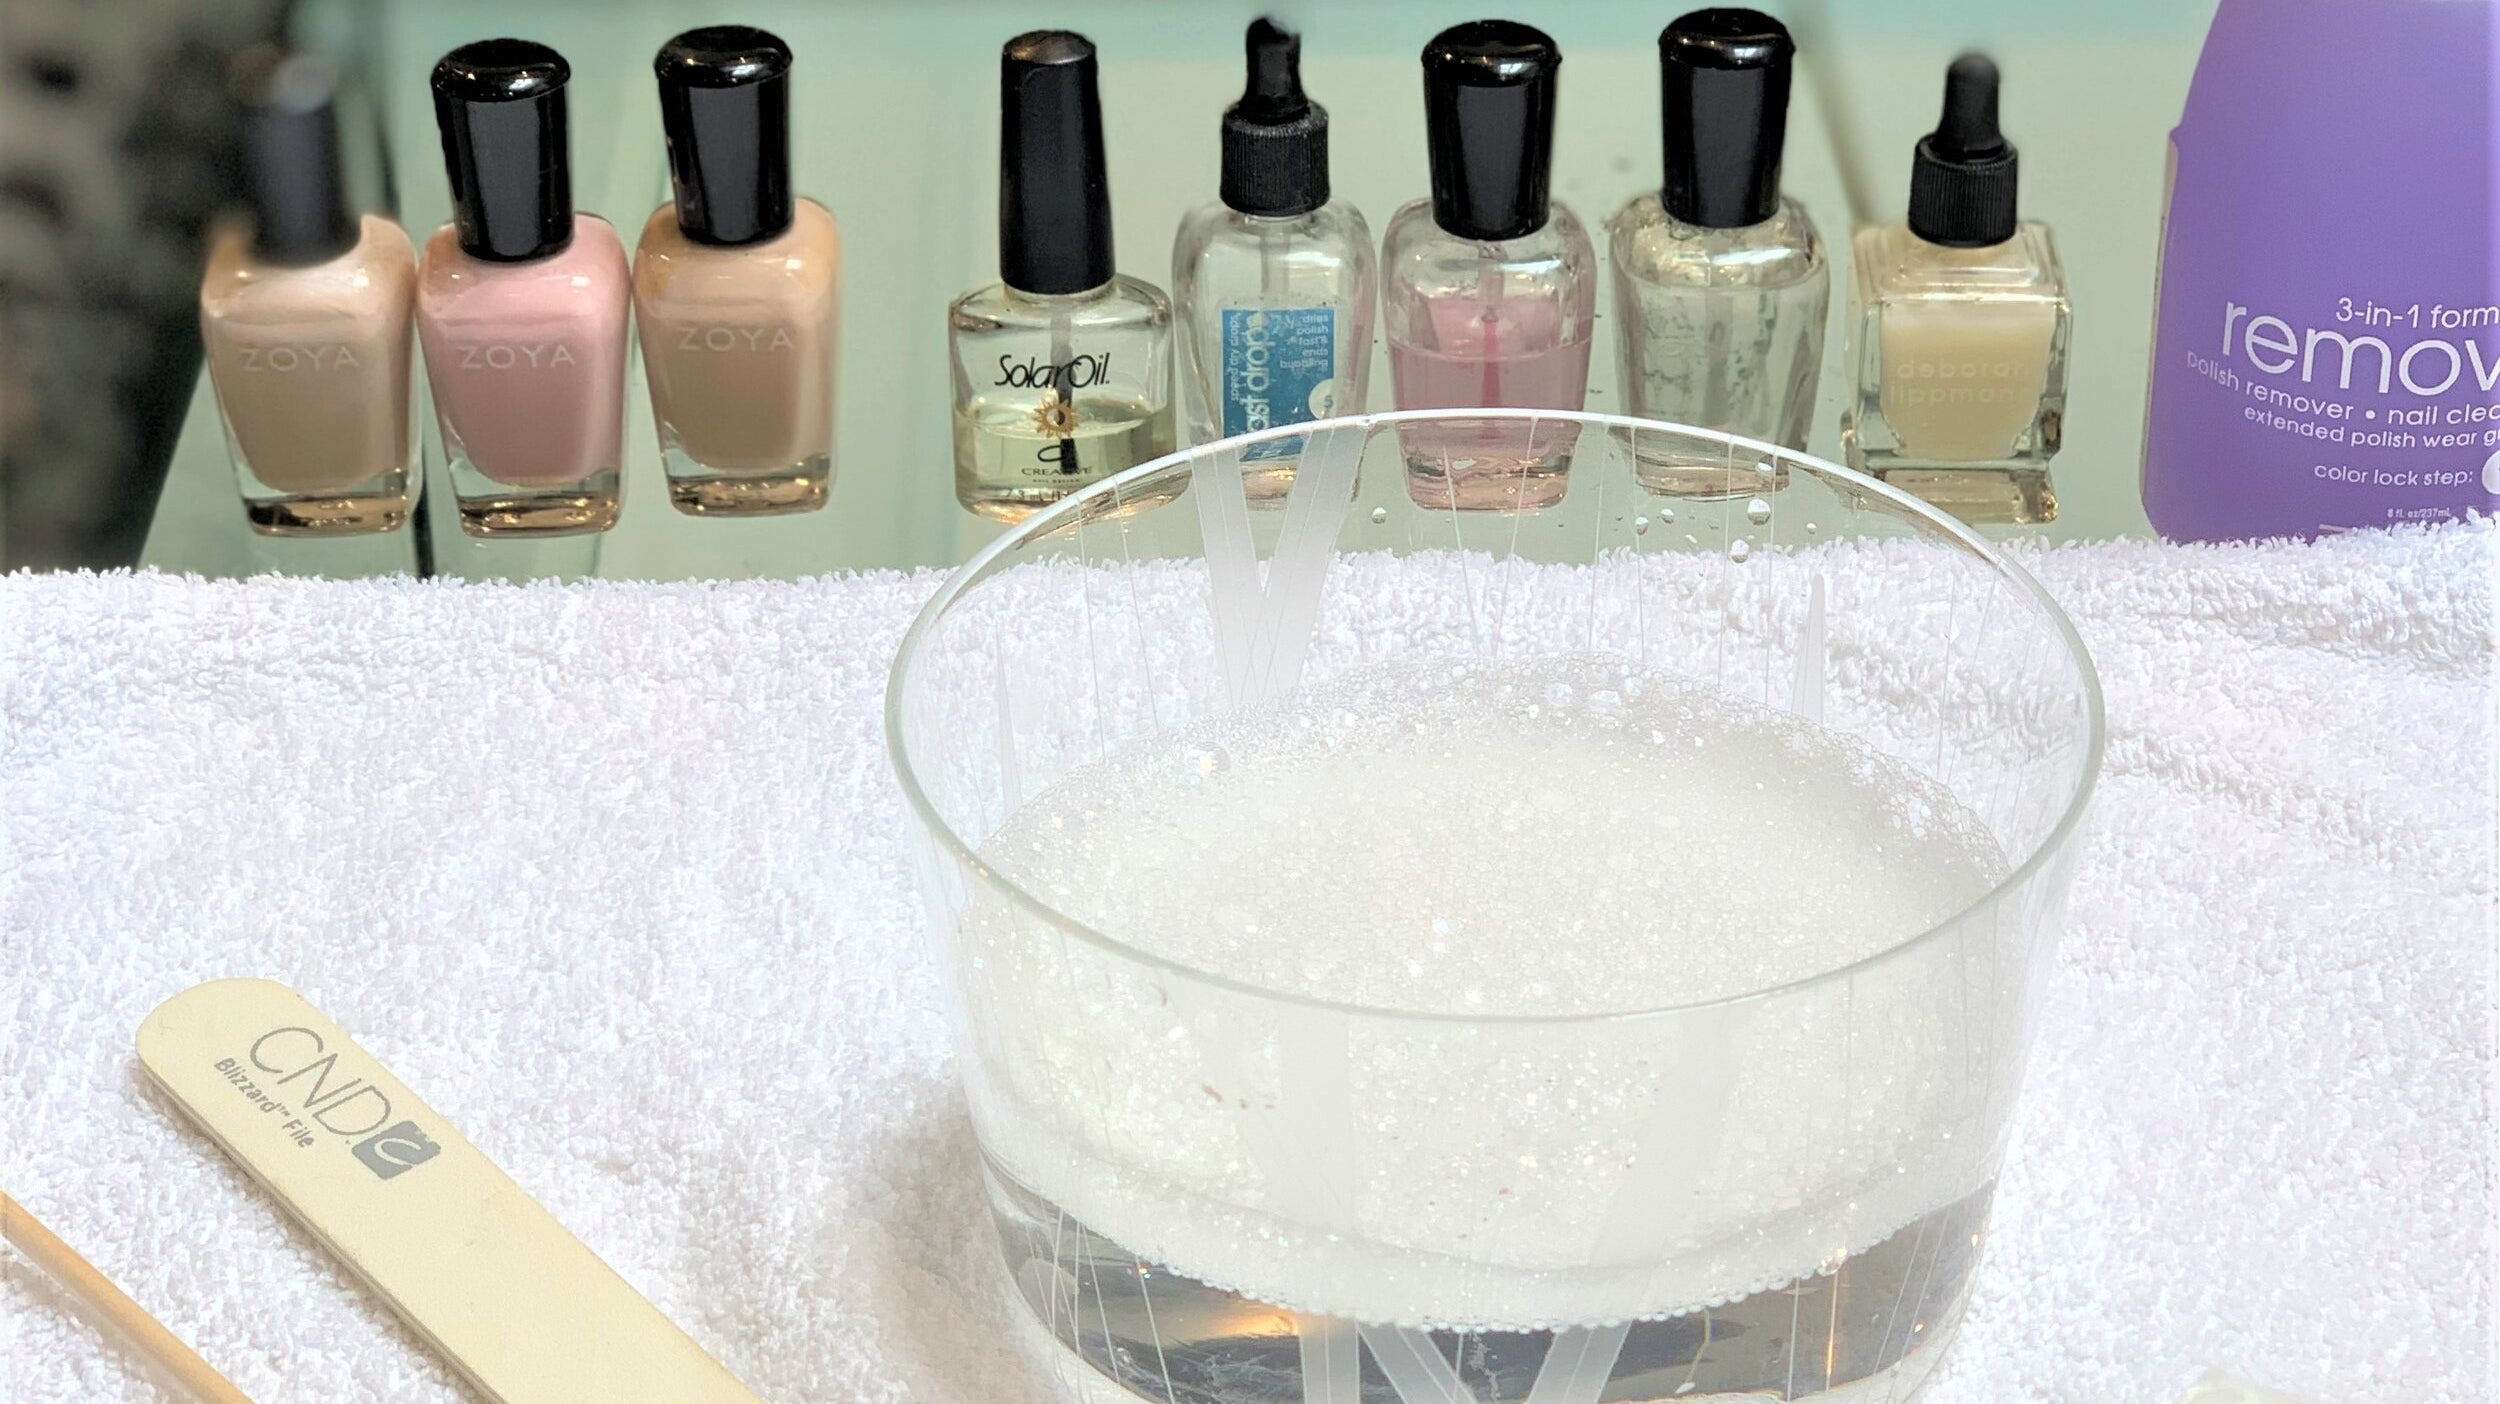 MANI LIKE A PRO WITH THIS DIY TUTORIAL